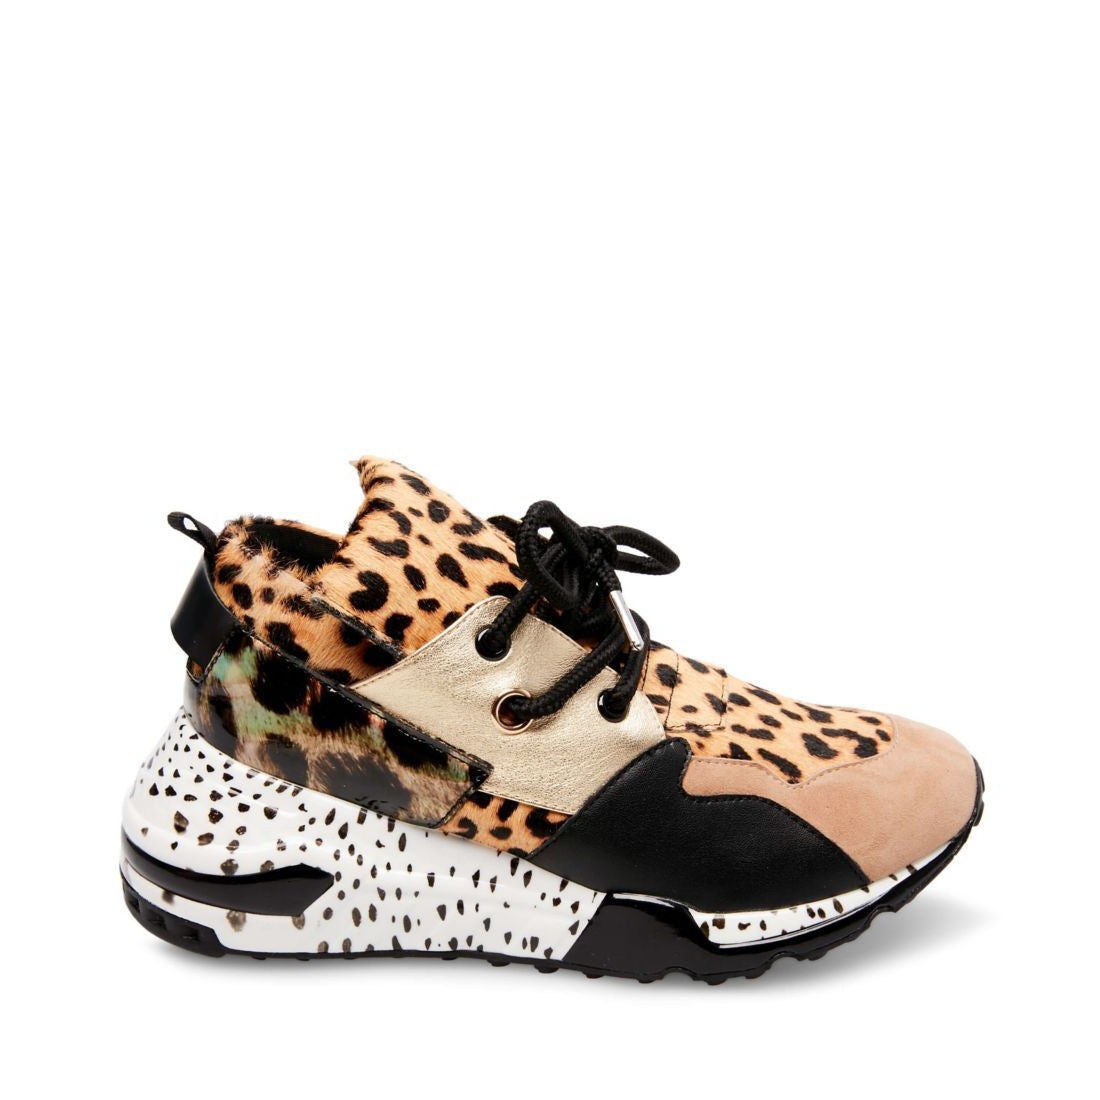 CLIFF ANIMAL - SM REBOOTED – Steve Madden